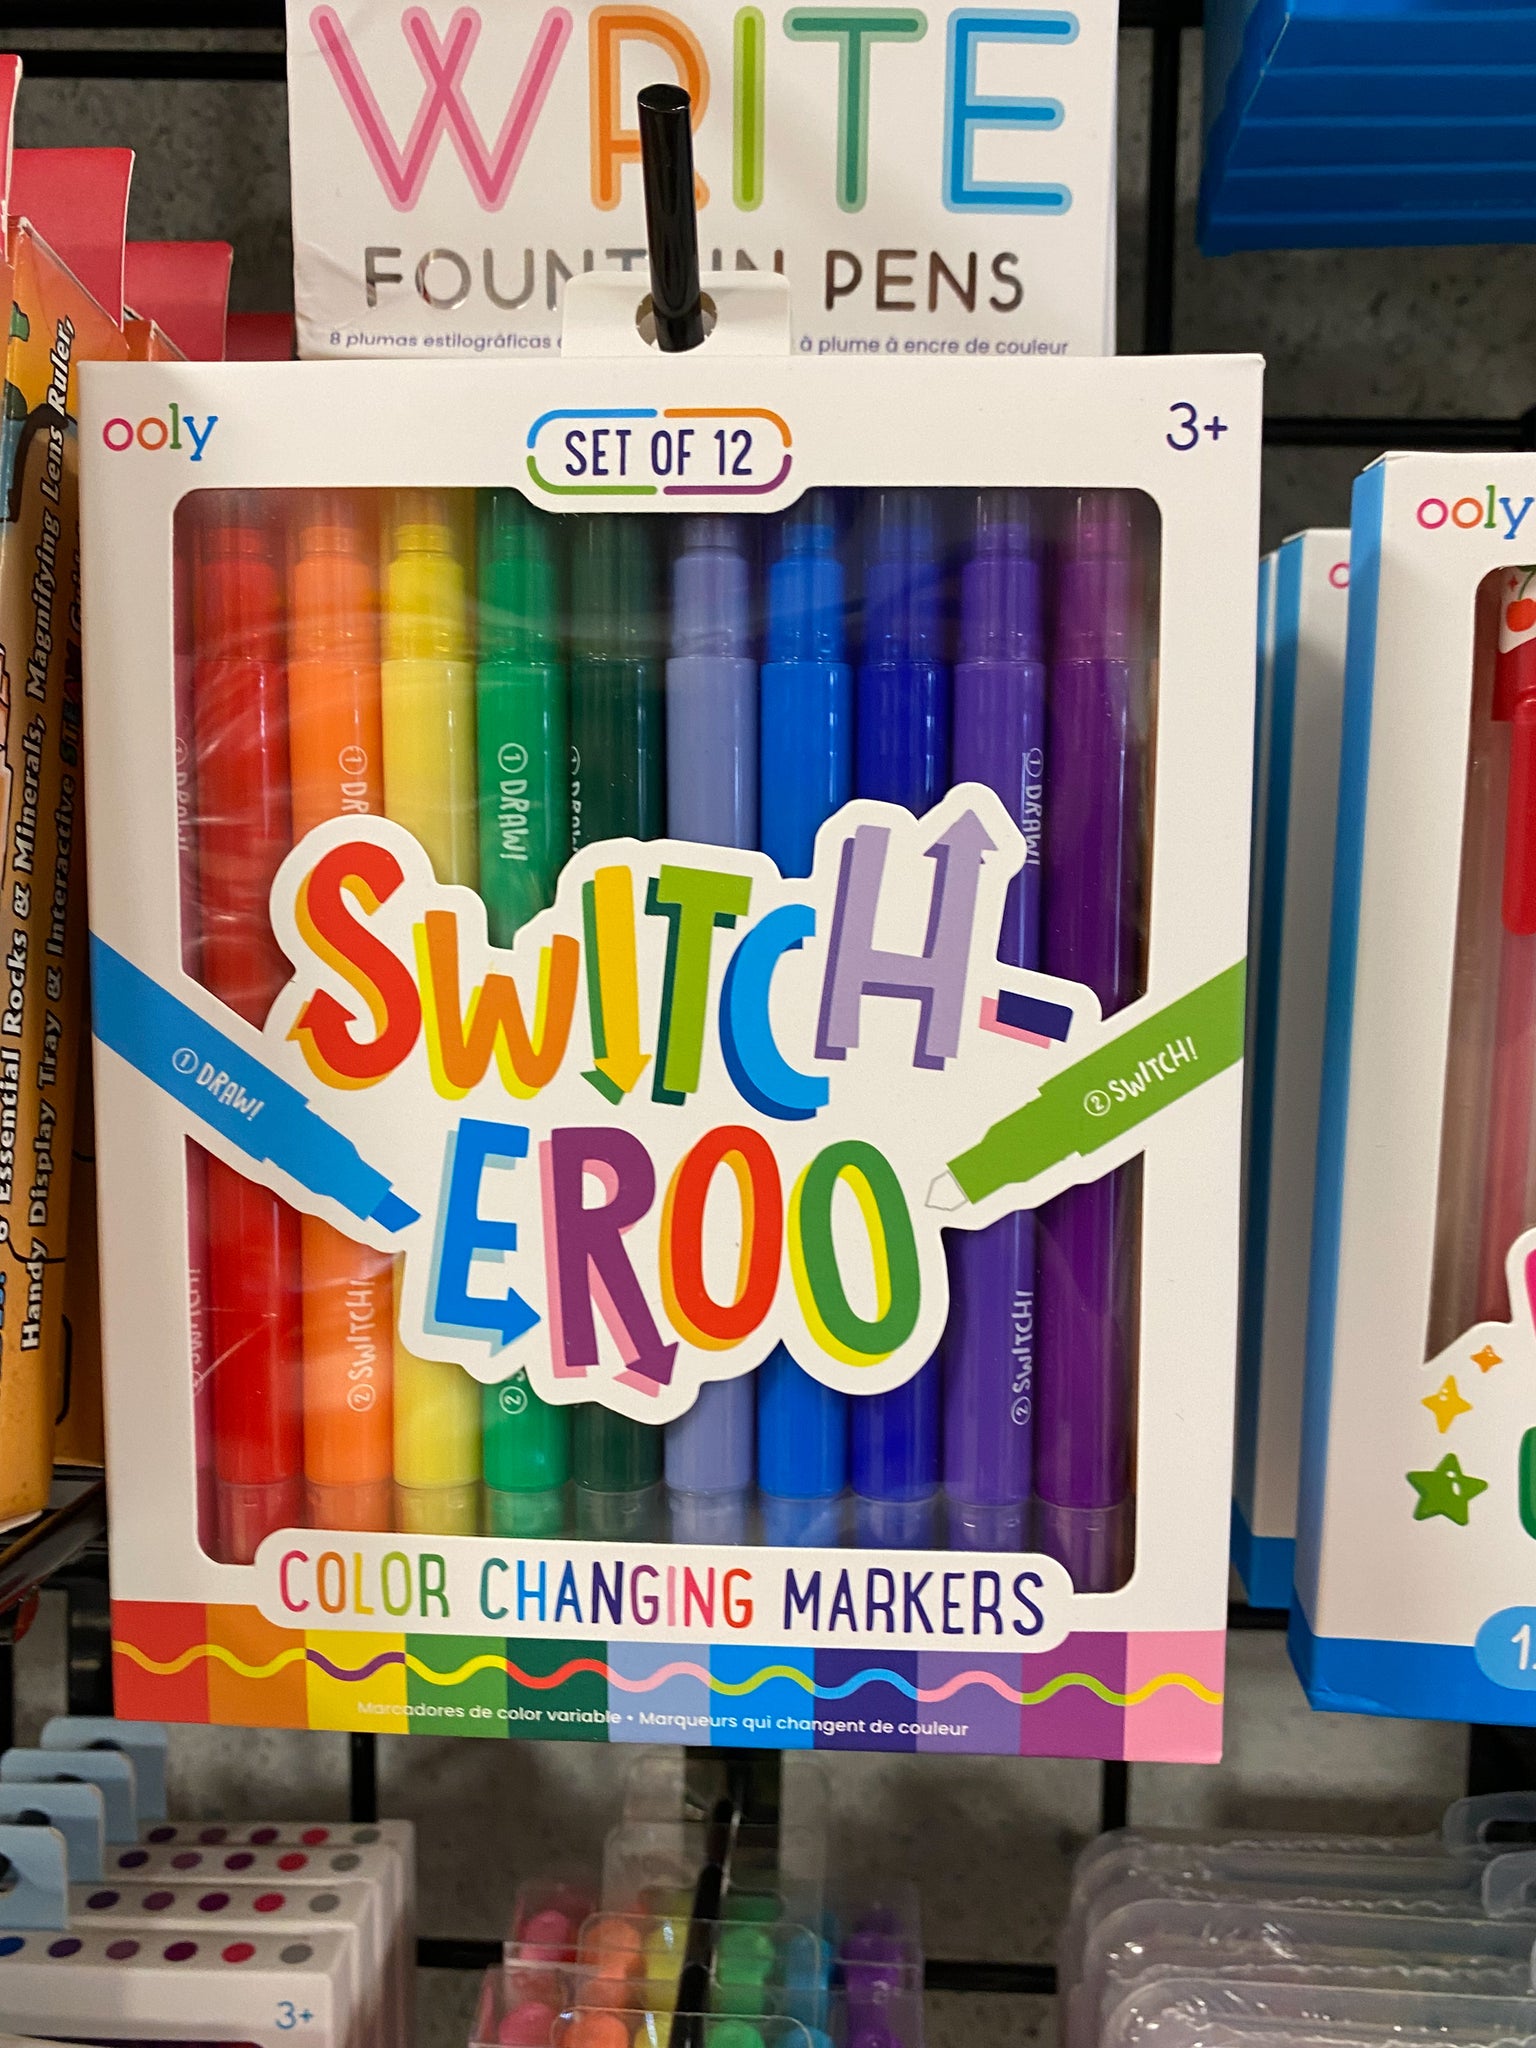 Switch-eroo! Color-Changing Markers 2.0